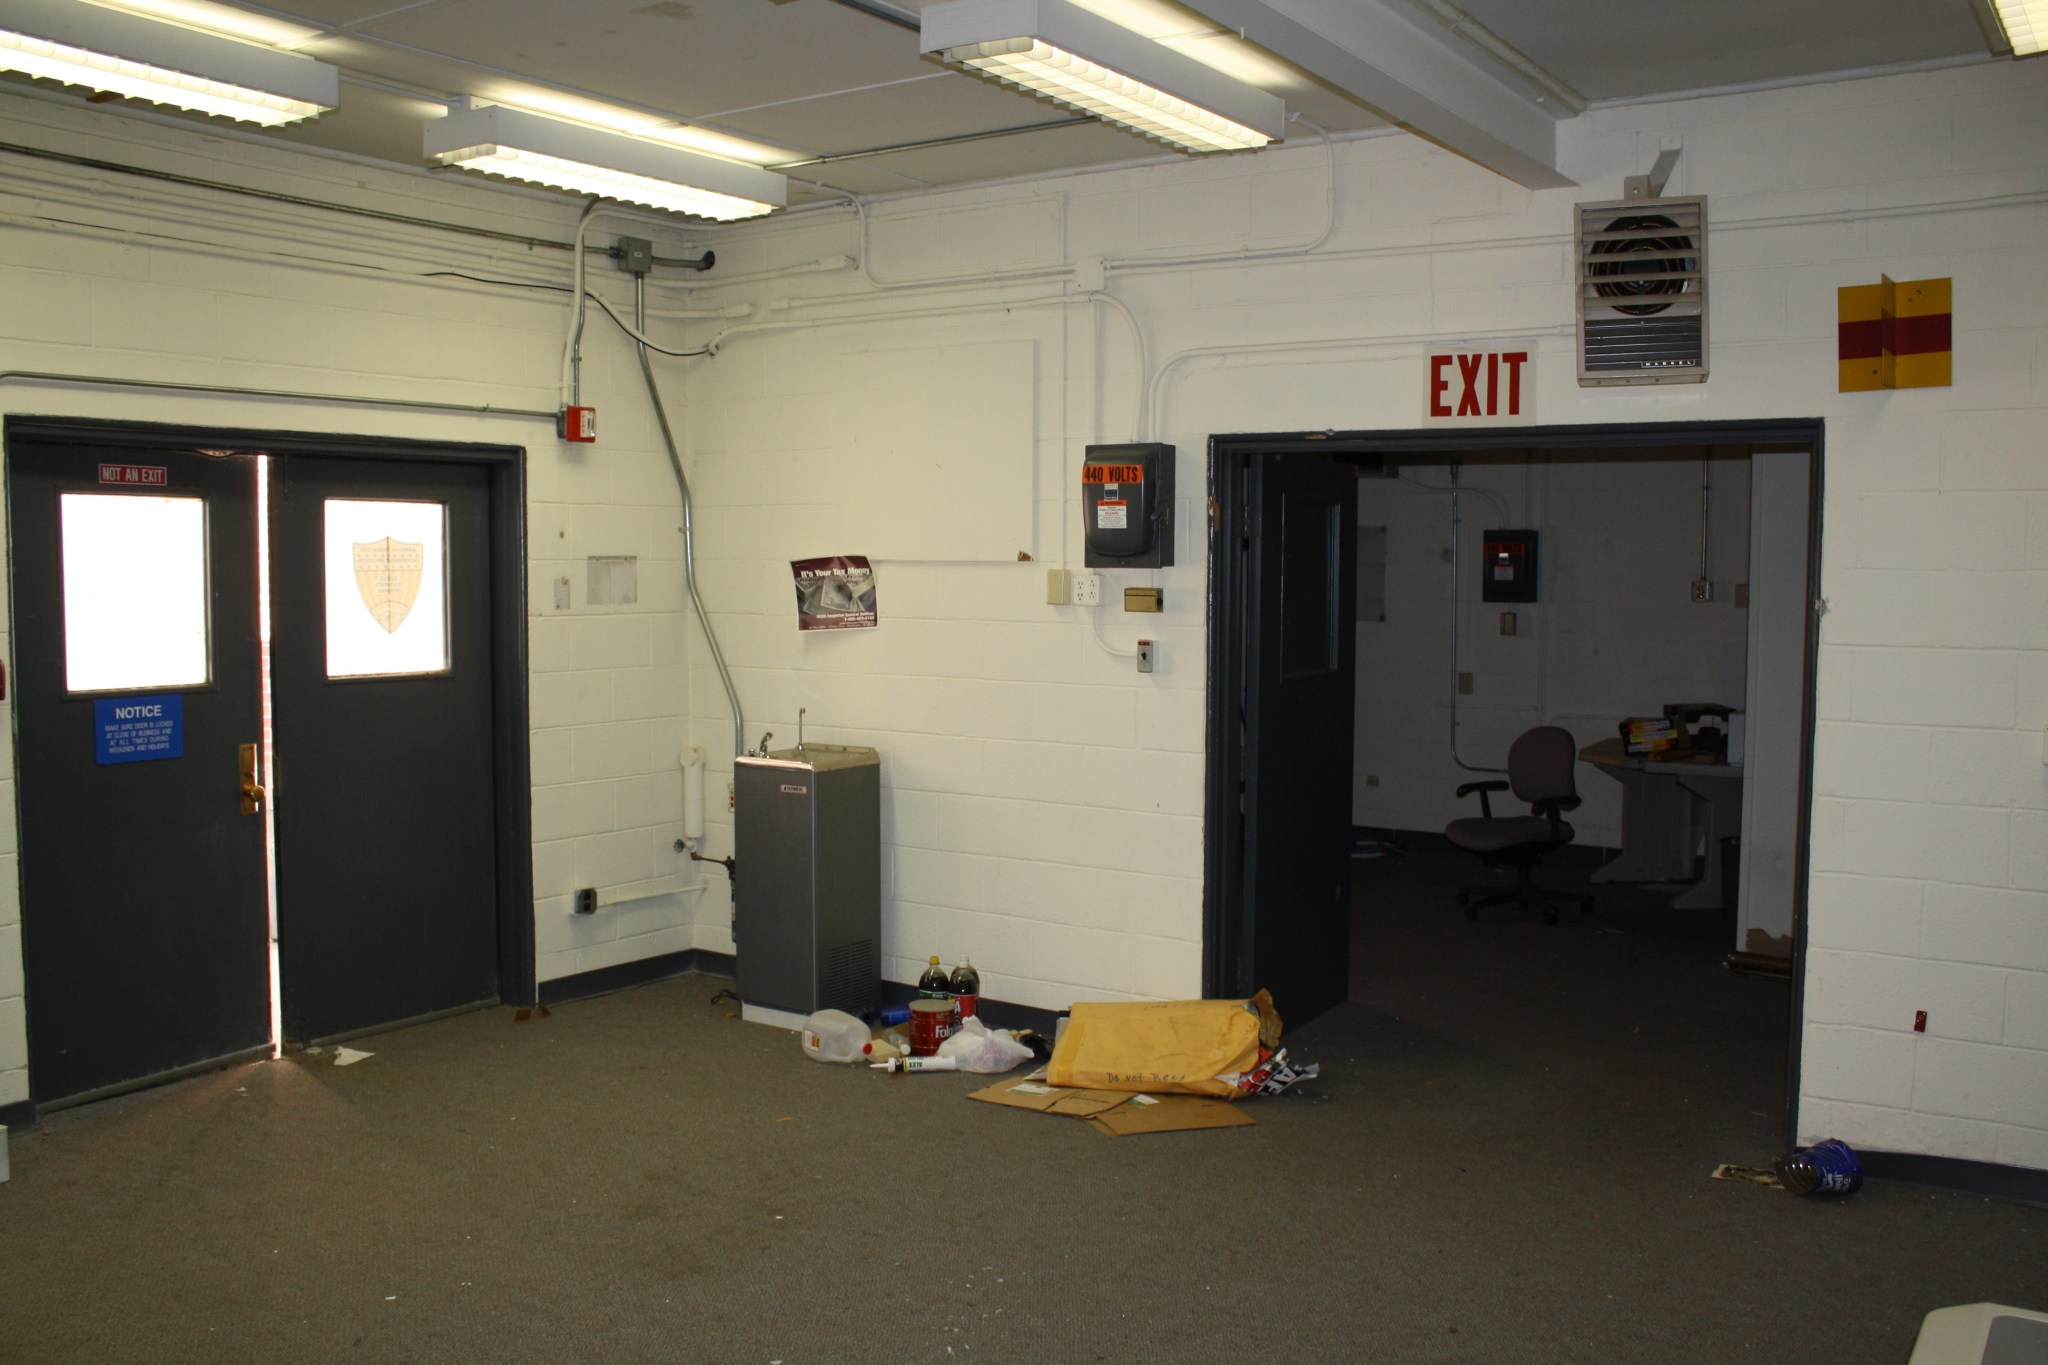 A 2009 pre-demolition look at the main entrance from inside of building 1232B.